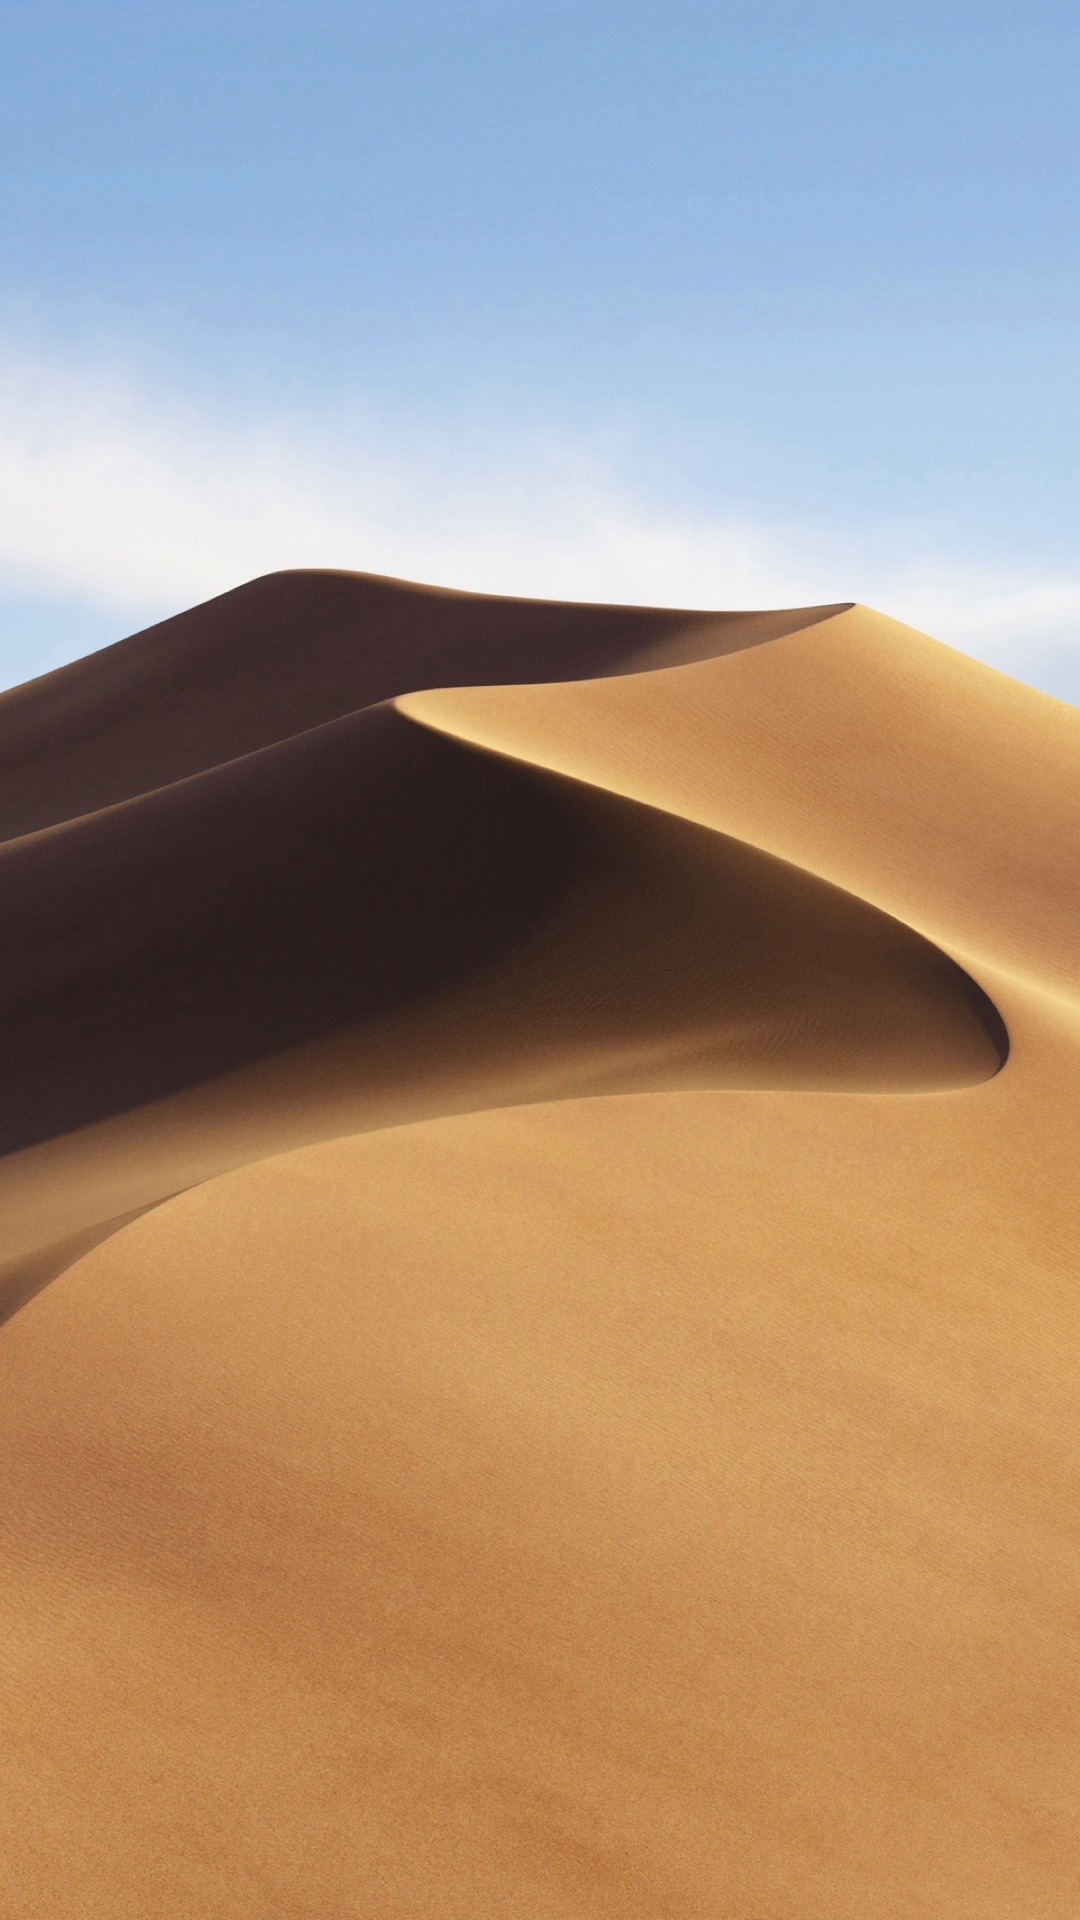 Wallpaper Weekends Macos Mojave Wallpapers For Iphone Ipad And Apple Watch